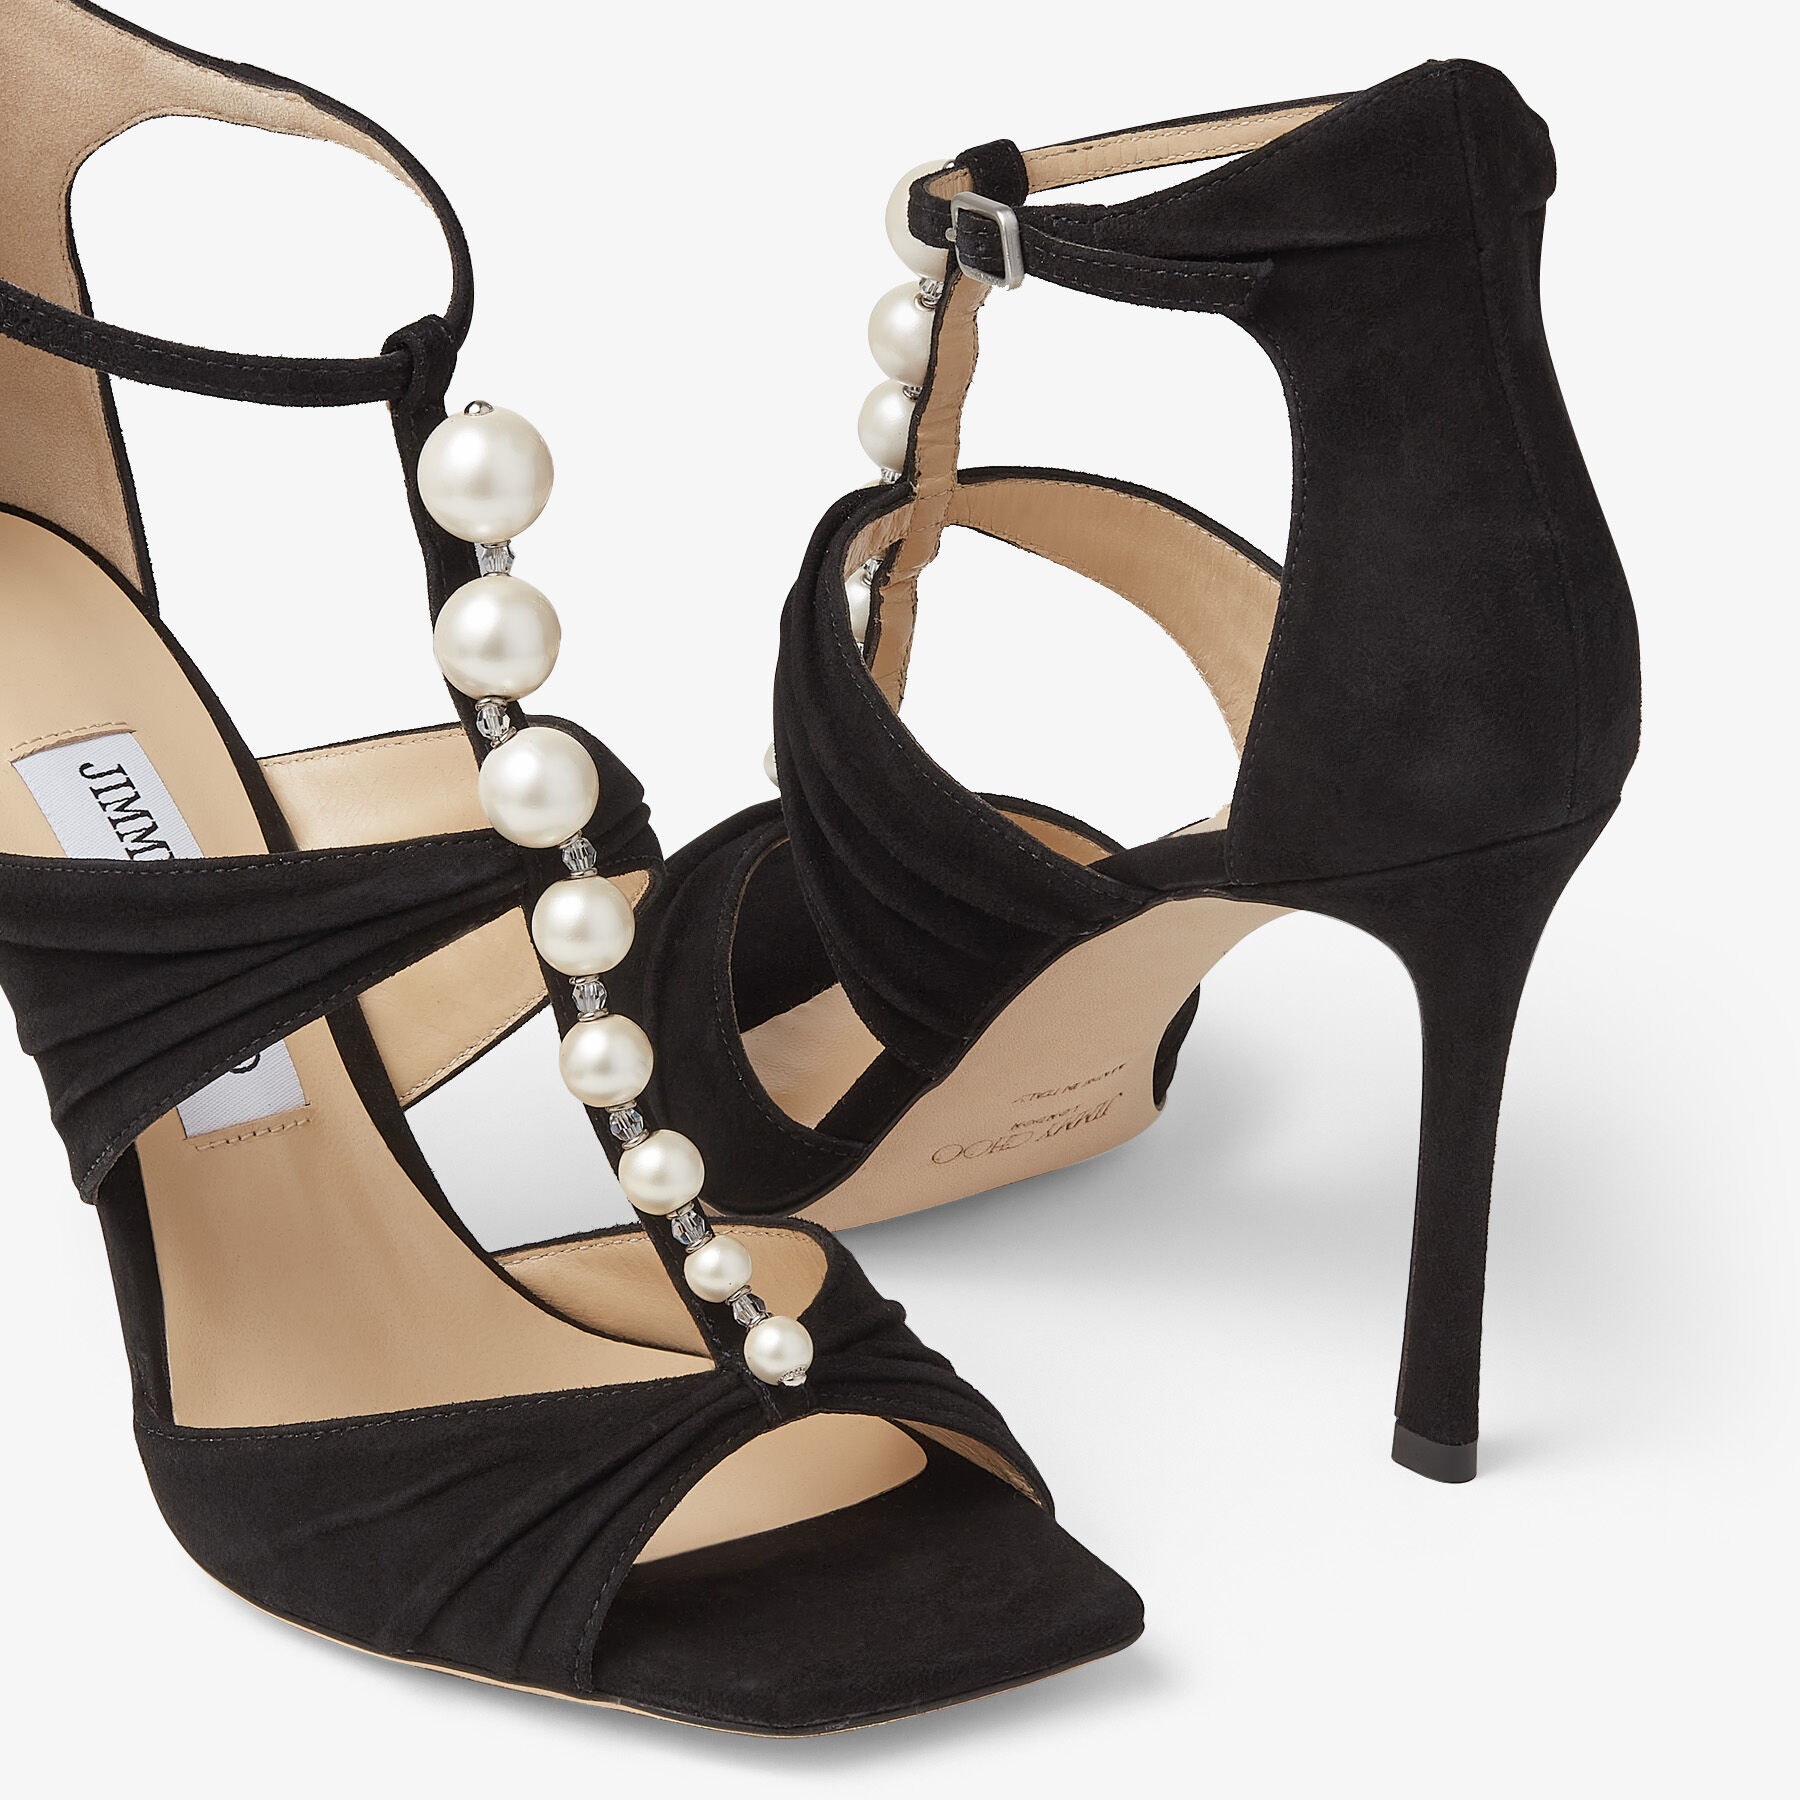 Aura 95
Black Suede Sandals with Pearls and Crystals - 4